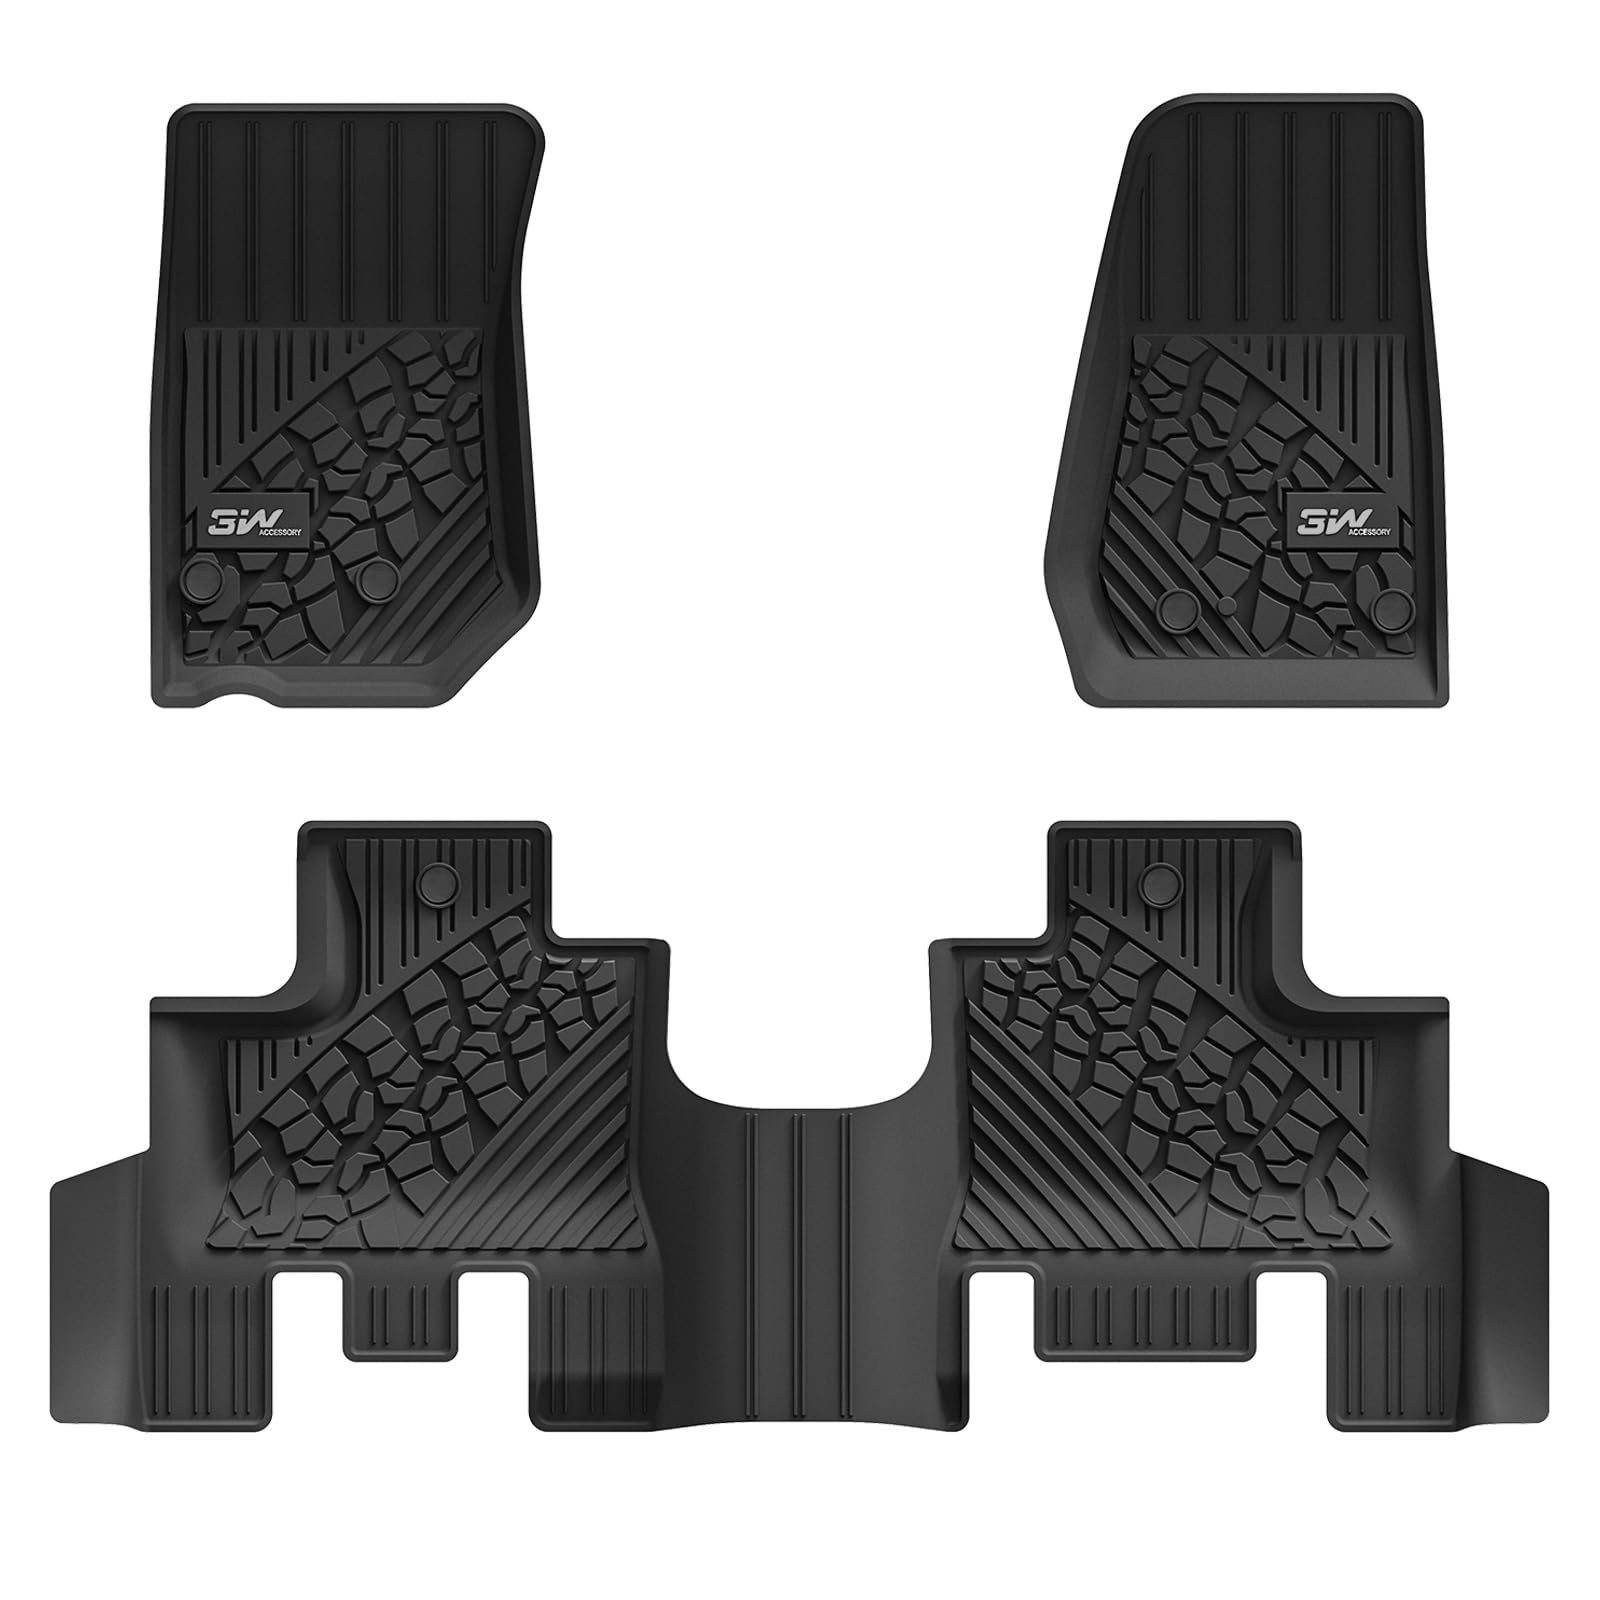 3W Jeep Wrangler JKU 2013-2018 Unlimited 4 Door Only Custom Floor Mats TPE Material & All-Weather Protection Vehicles & Parts 3Wliners 2013-2018 Wrangler JK 2013-2018 1st&2nd Row Mats